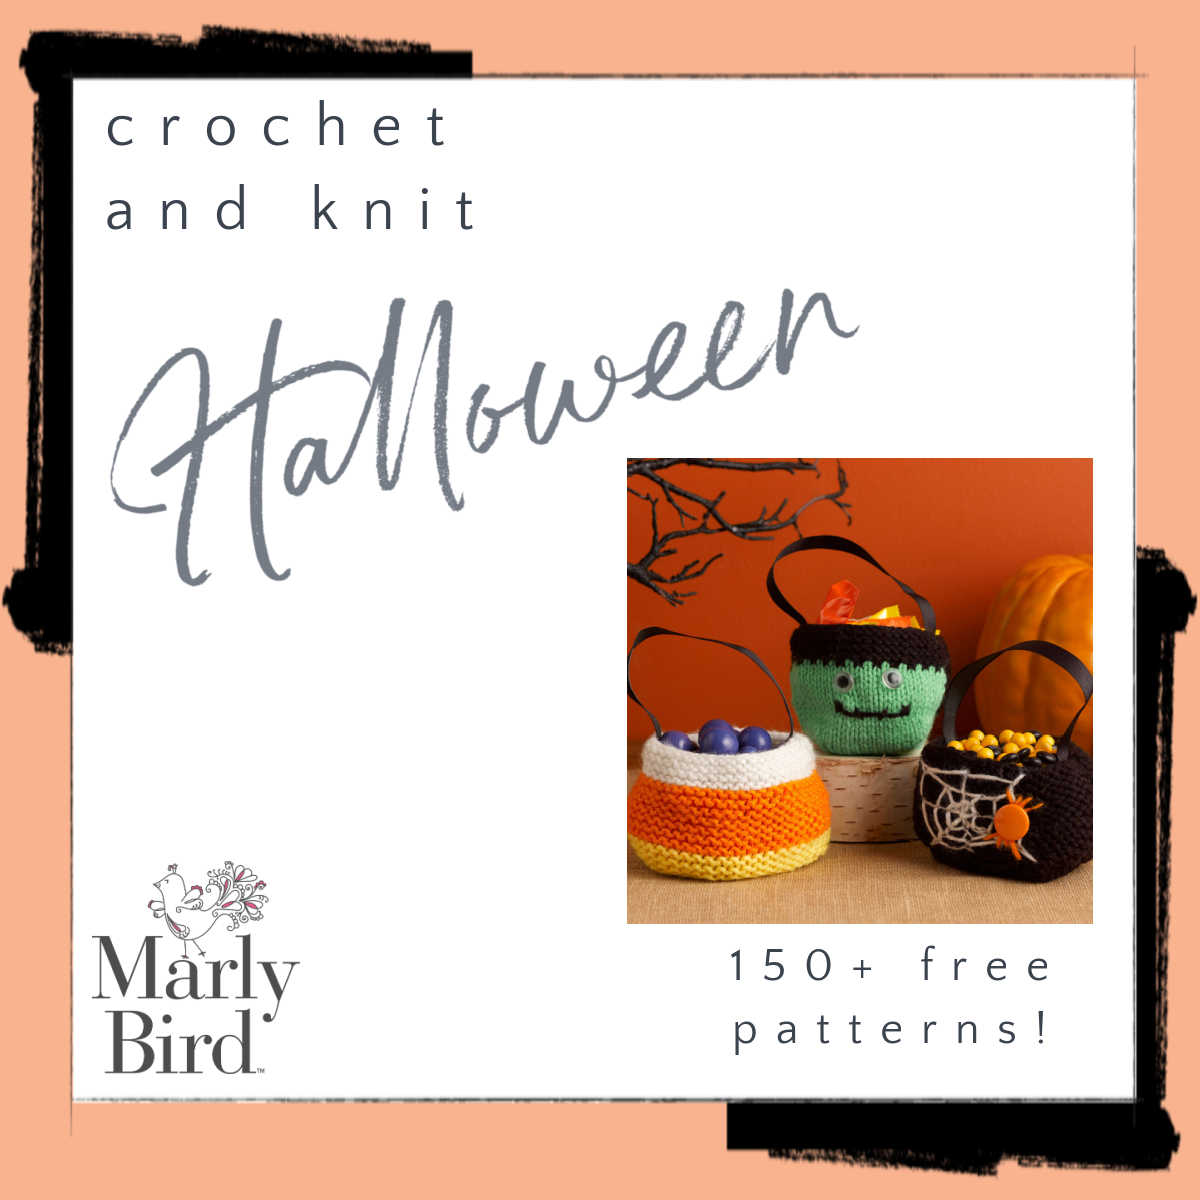 Promotional image for Marly Bird featuring Halloween-themed crochet and knit patterns, including a Frankenstein design and cauldron, beside pumpkins. Text highlights "150+ free Halloween decorations and costumes. -Marly Bird